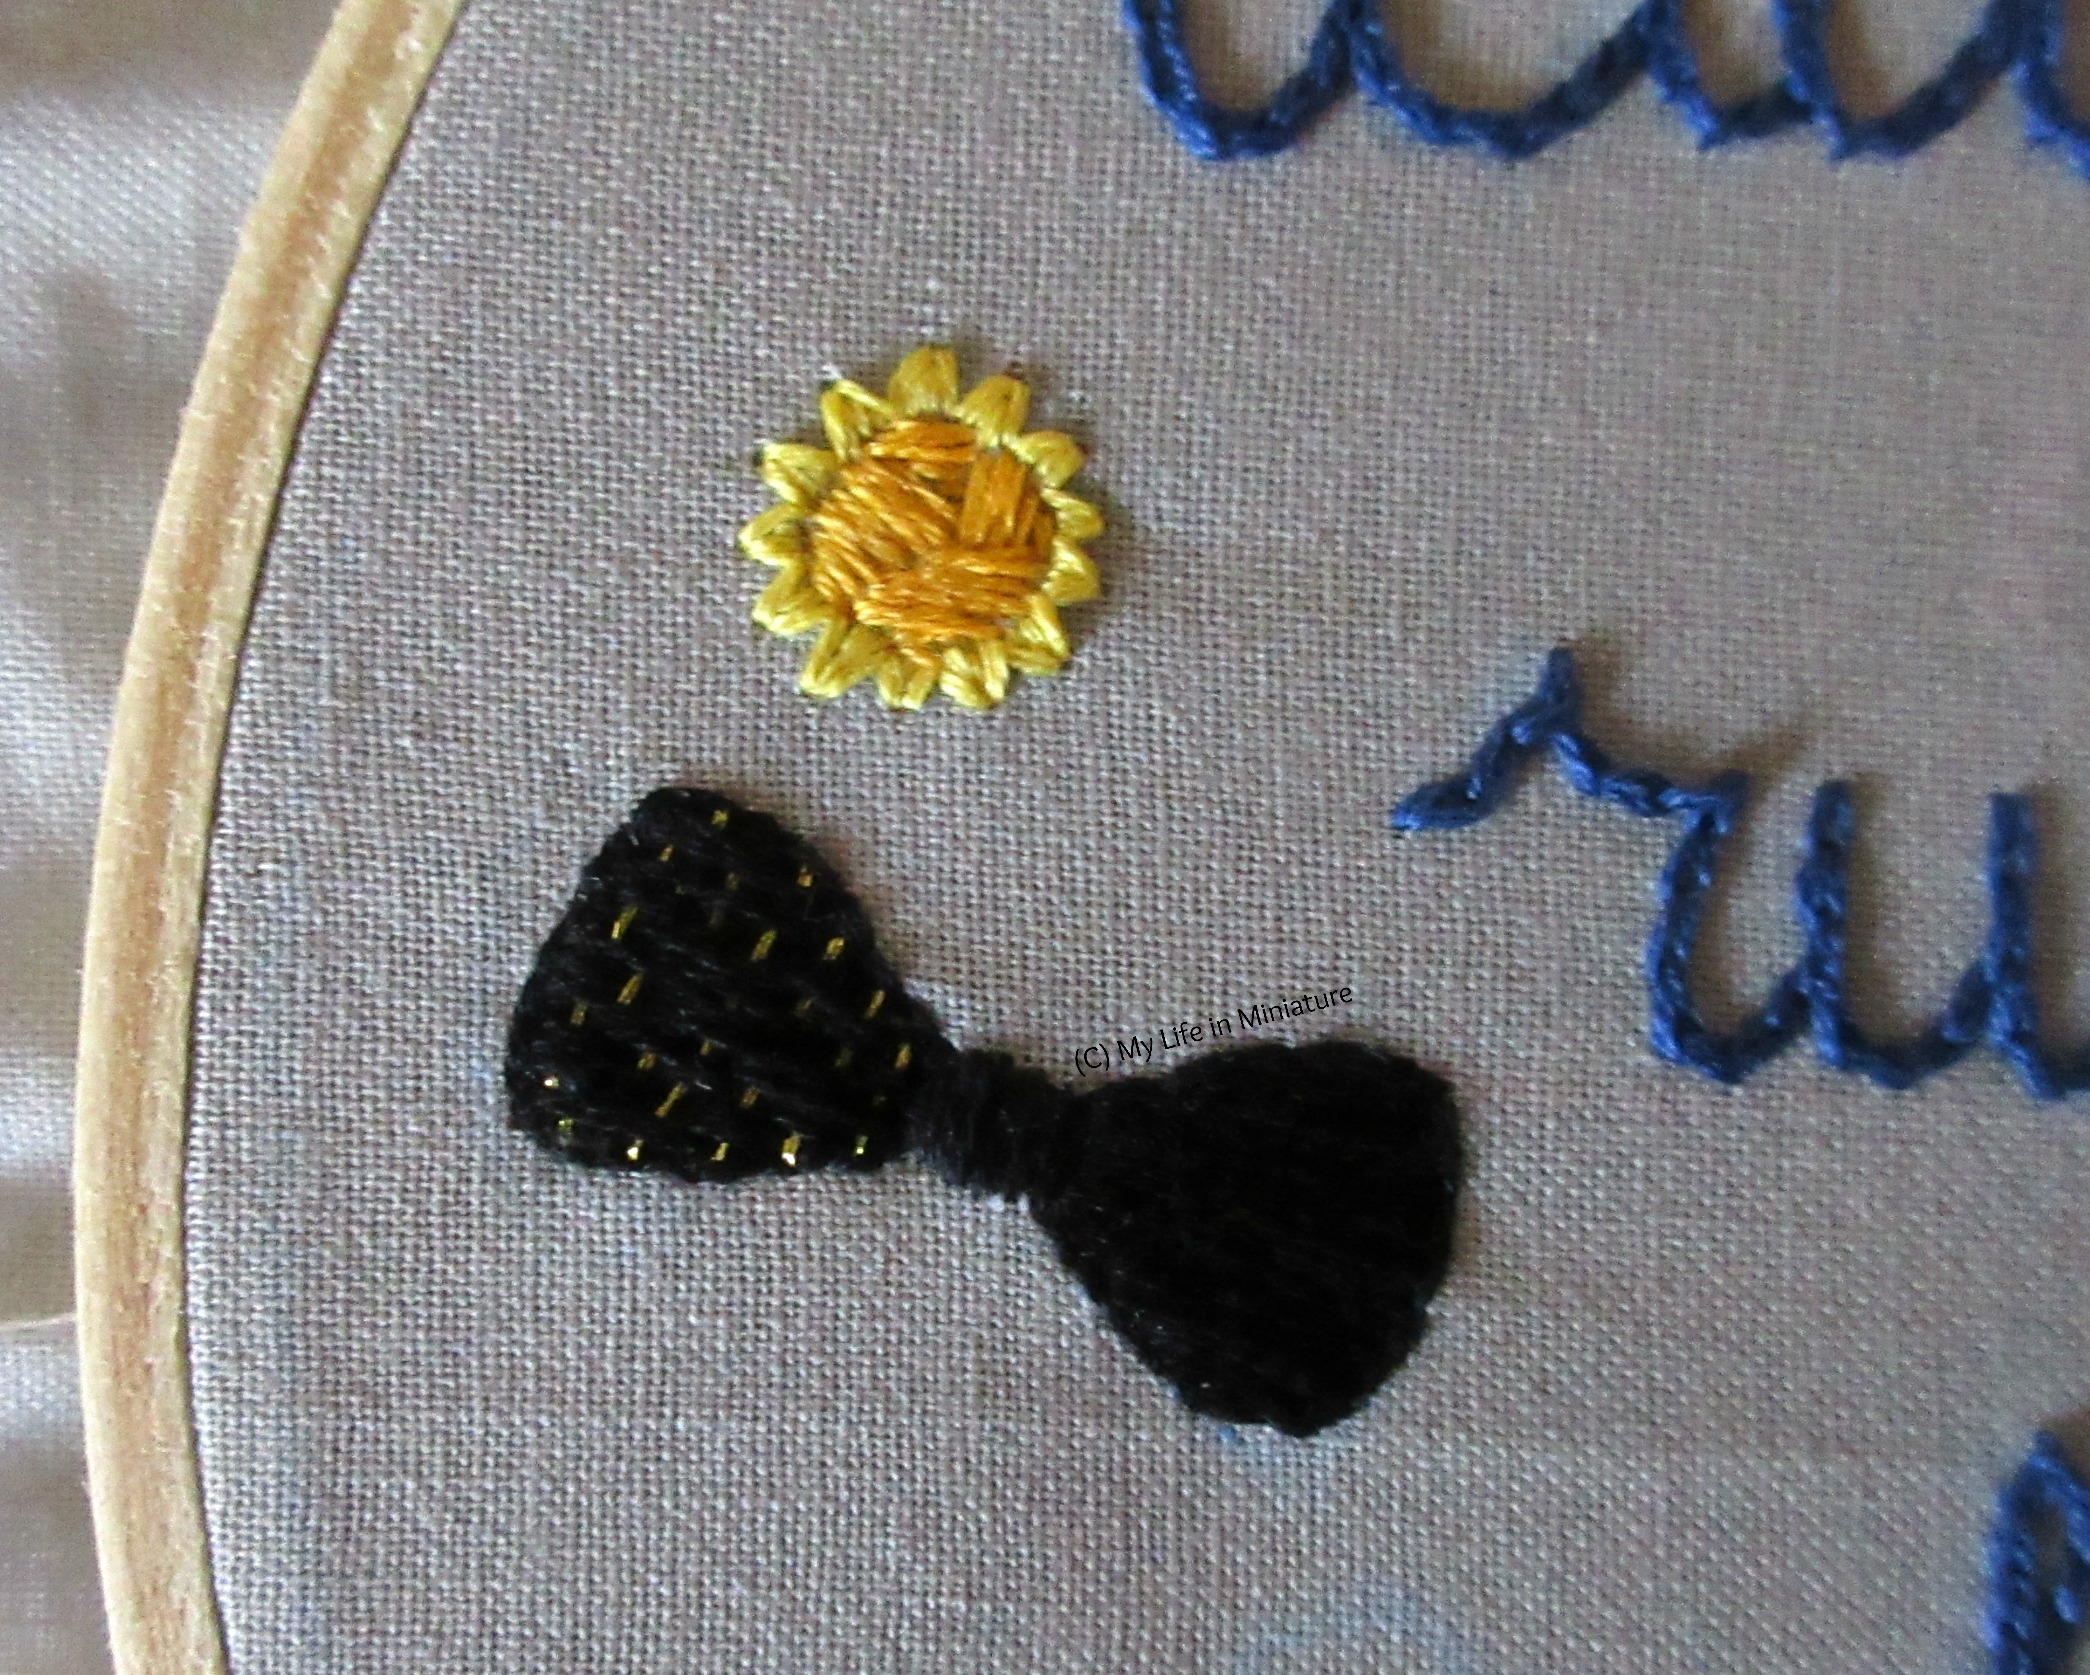 A close-up of the yellow stitching from the last image, this time with the centre filled. It's filled with asymmetrical stitches in a darker yellow, and the motif looks like a daffodil head from straight-on. 